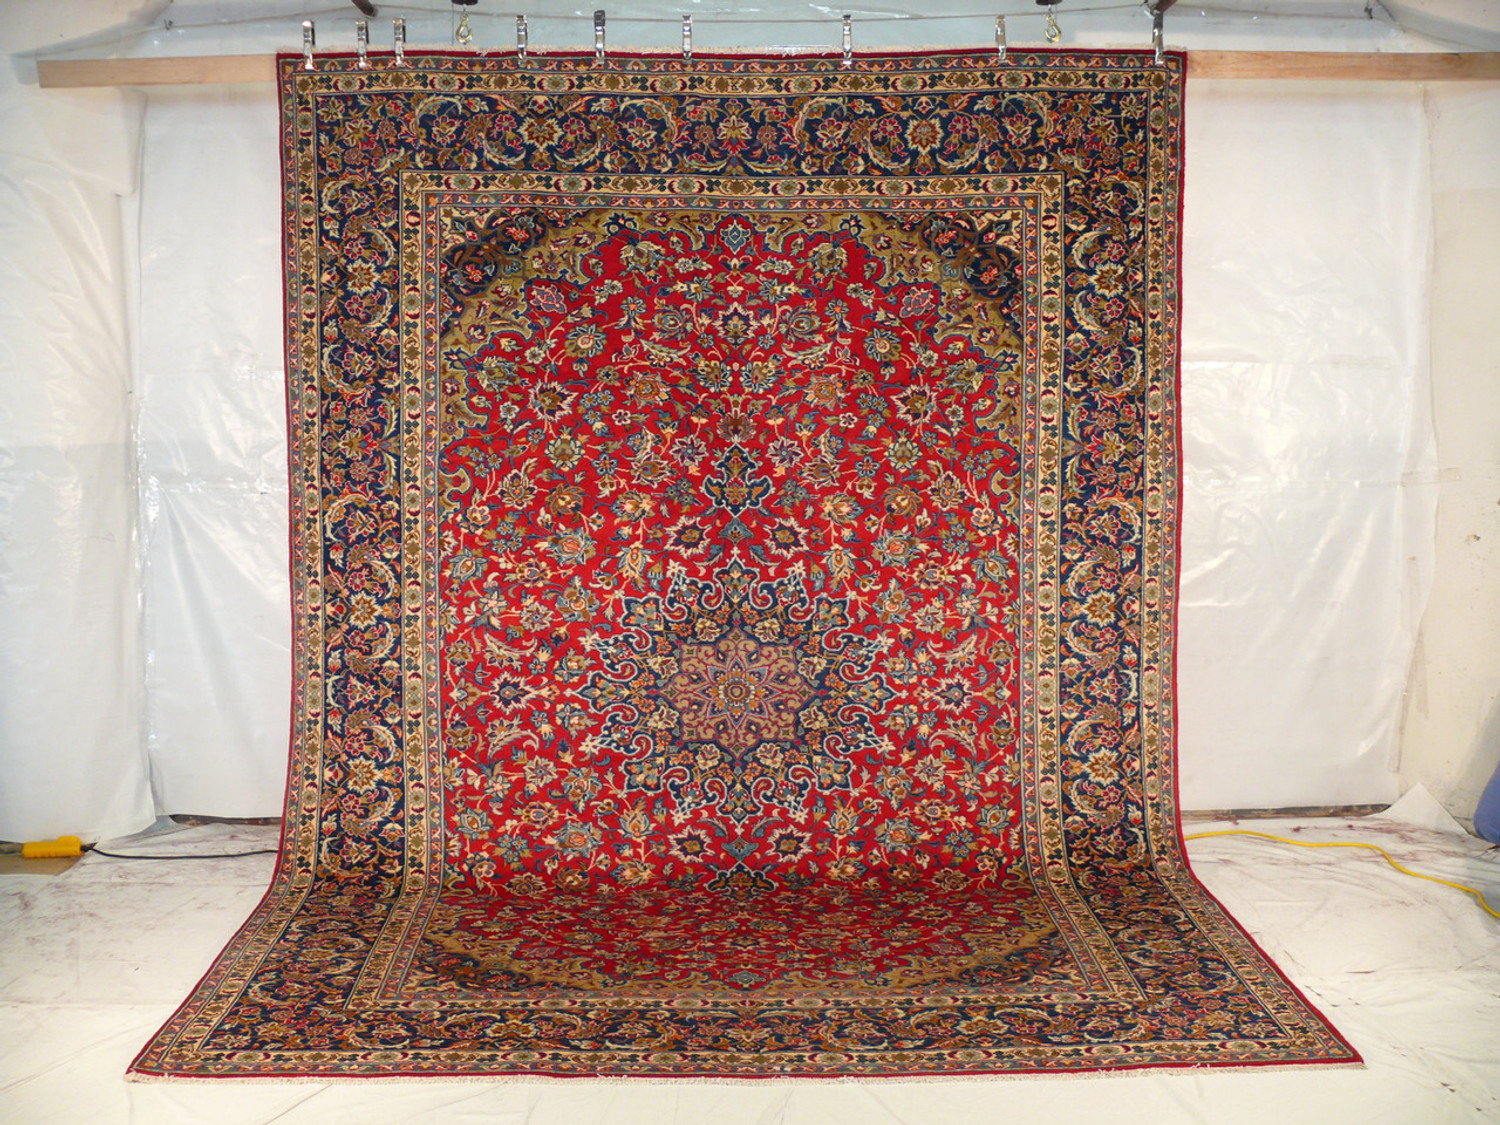 Full-length view of the 10x13 Persian Isfahan rug suspended vertically, exhibiting its grand scale, with the rich reds and deep blues of the field and border vividly on display against a neutral backdrop